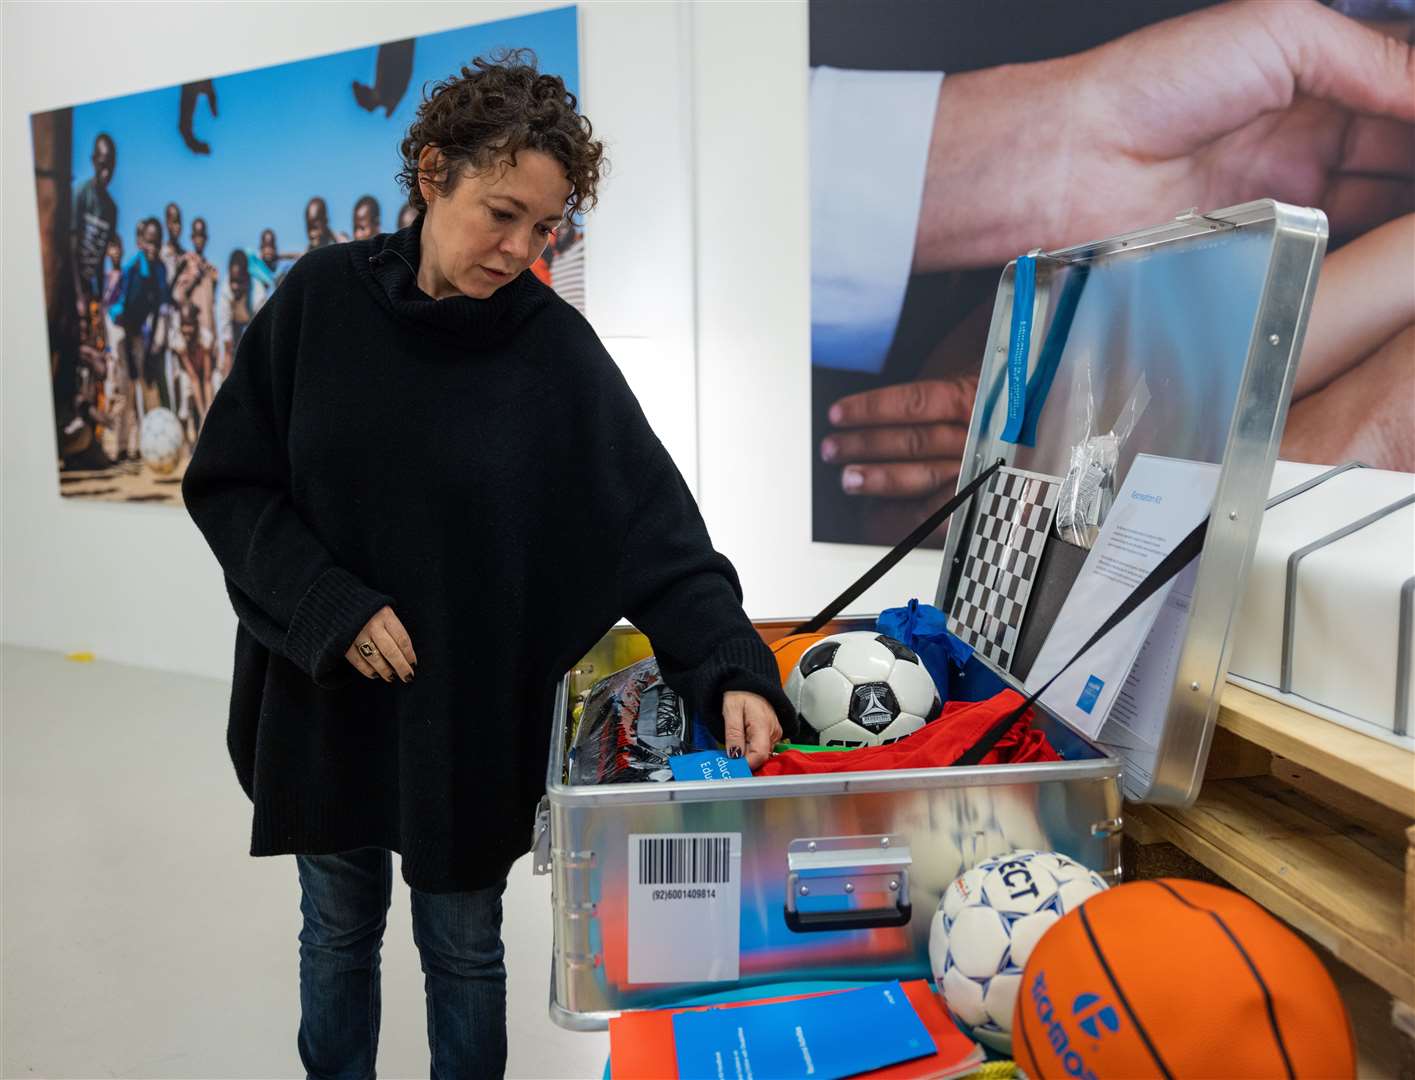 Olivia Colman on a visit to Unicef’s Global Humanitarian Supply Hub in Denmark in 2022, where she helped pack emergency supplies for families in need (Unicef/Asamoah/PA)